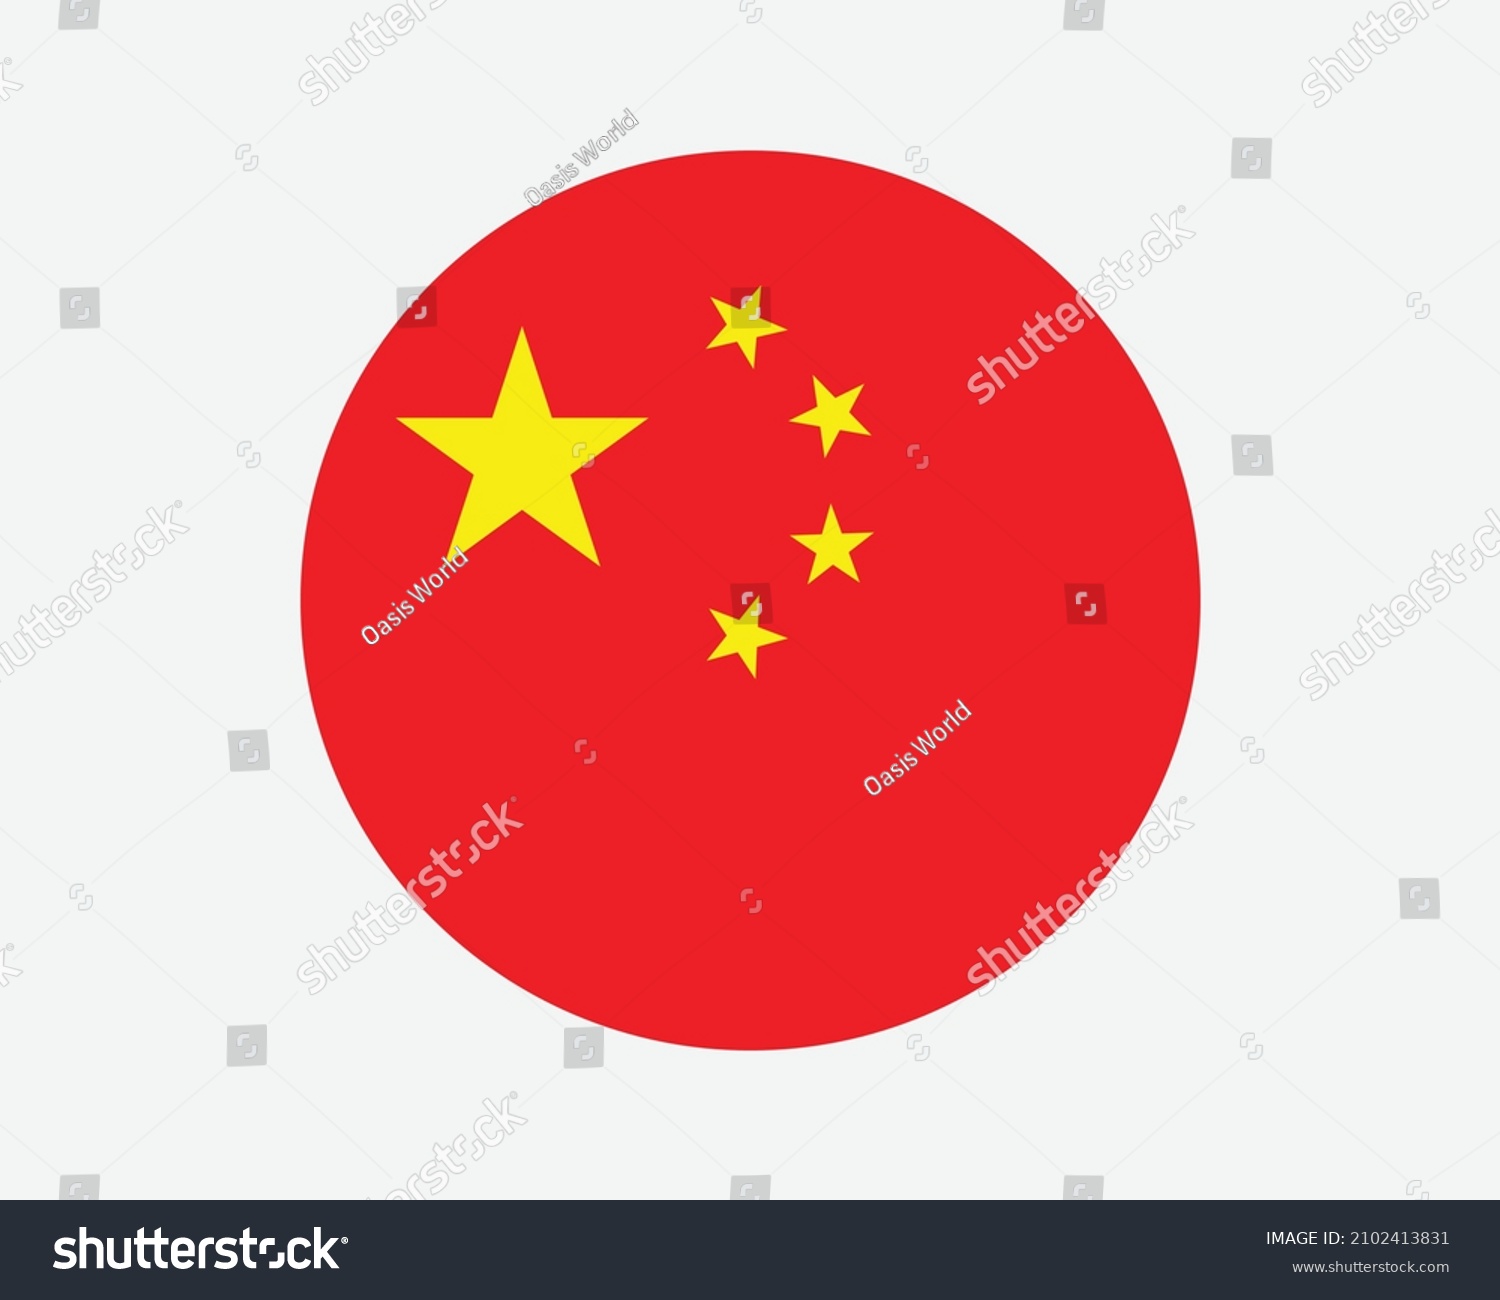 SVG of China Round Country Flag. Circular Chinese National Flag. People's Republic of China Circle Shape Button Banner. EPS Vector Illustration. svg